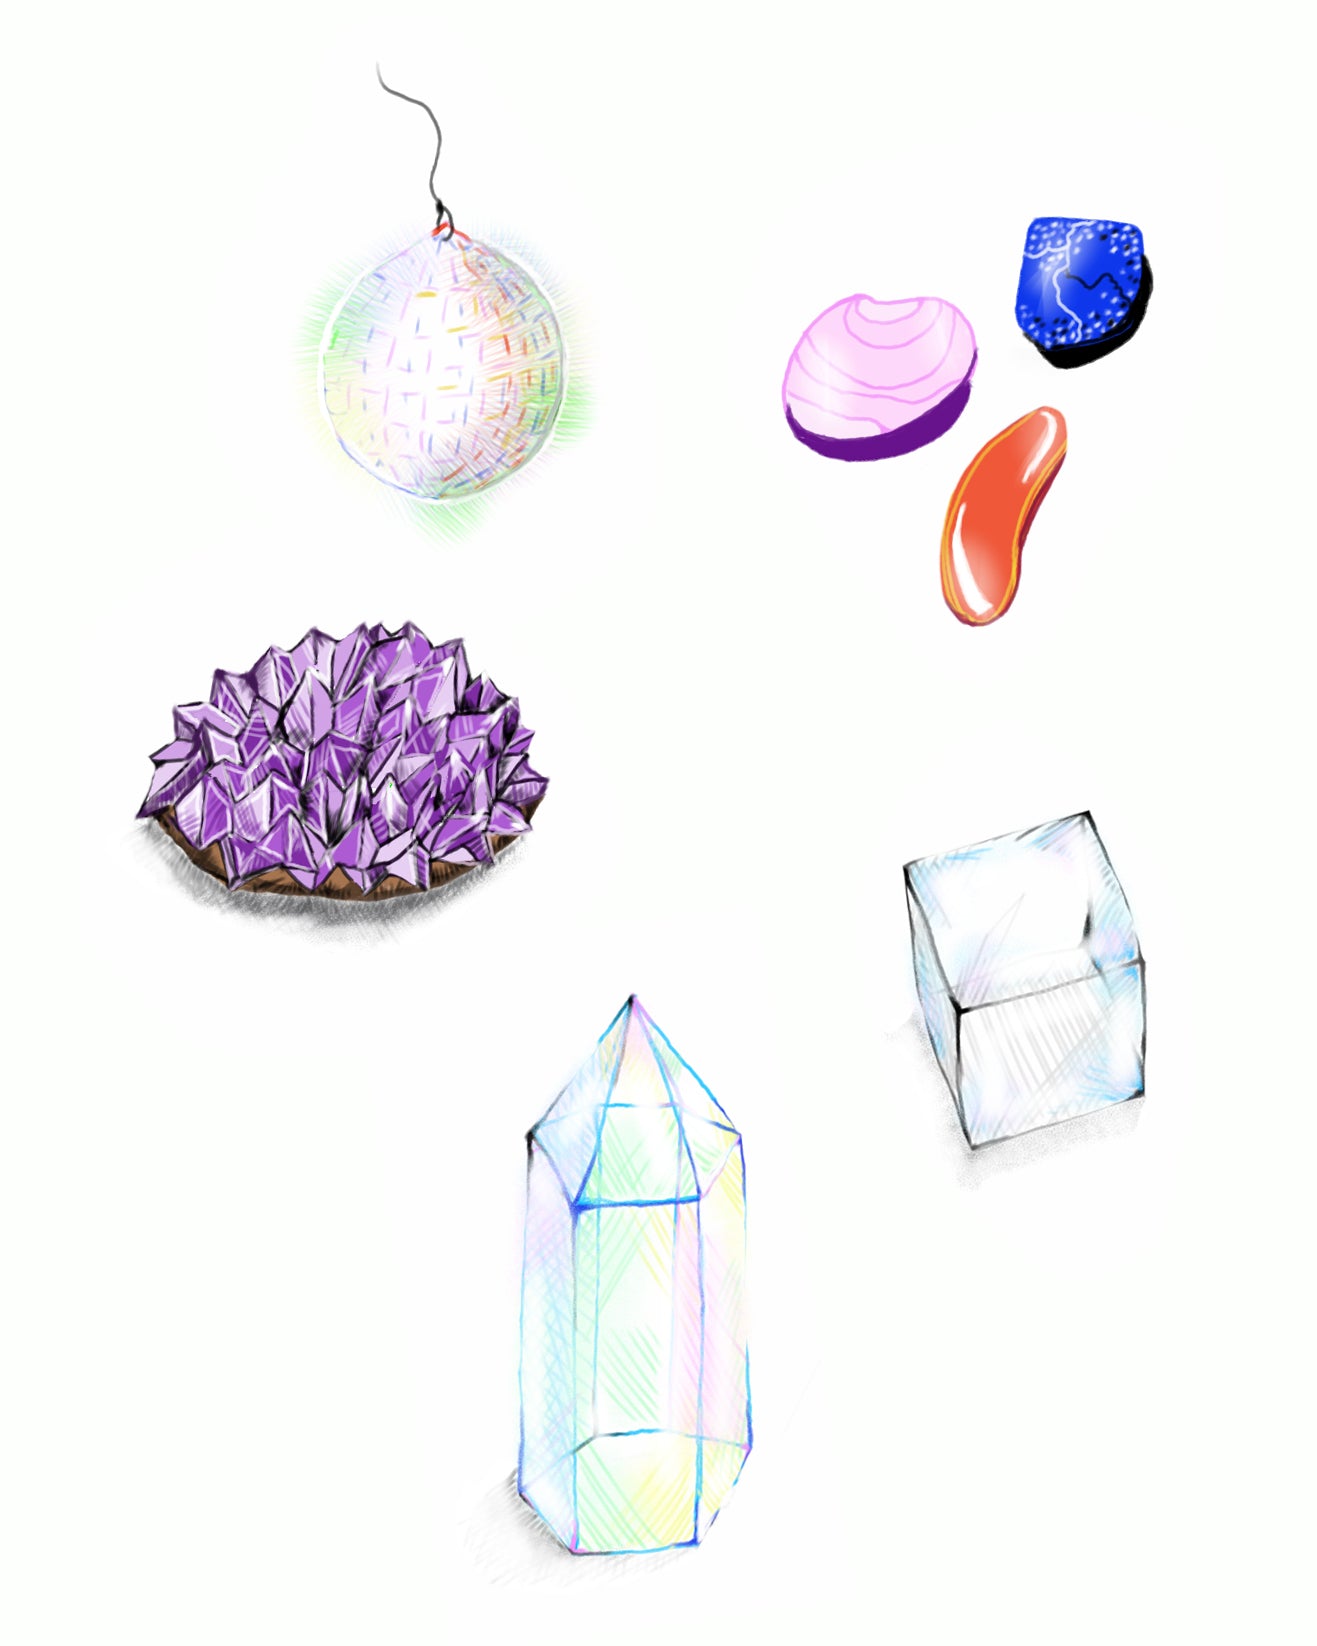 Five Crystal Shapes and How to Use Them